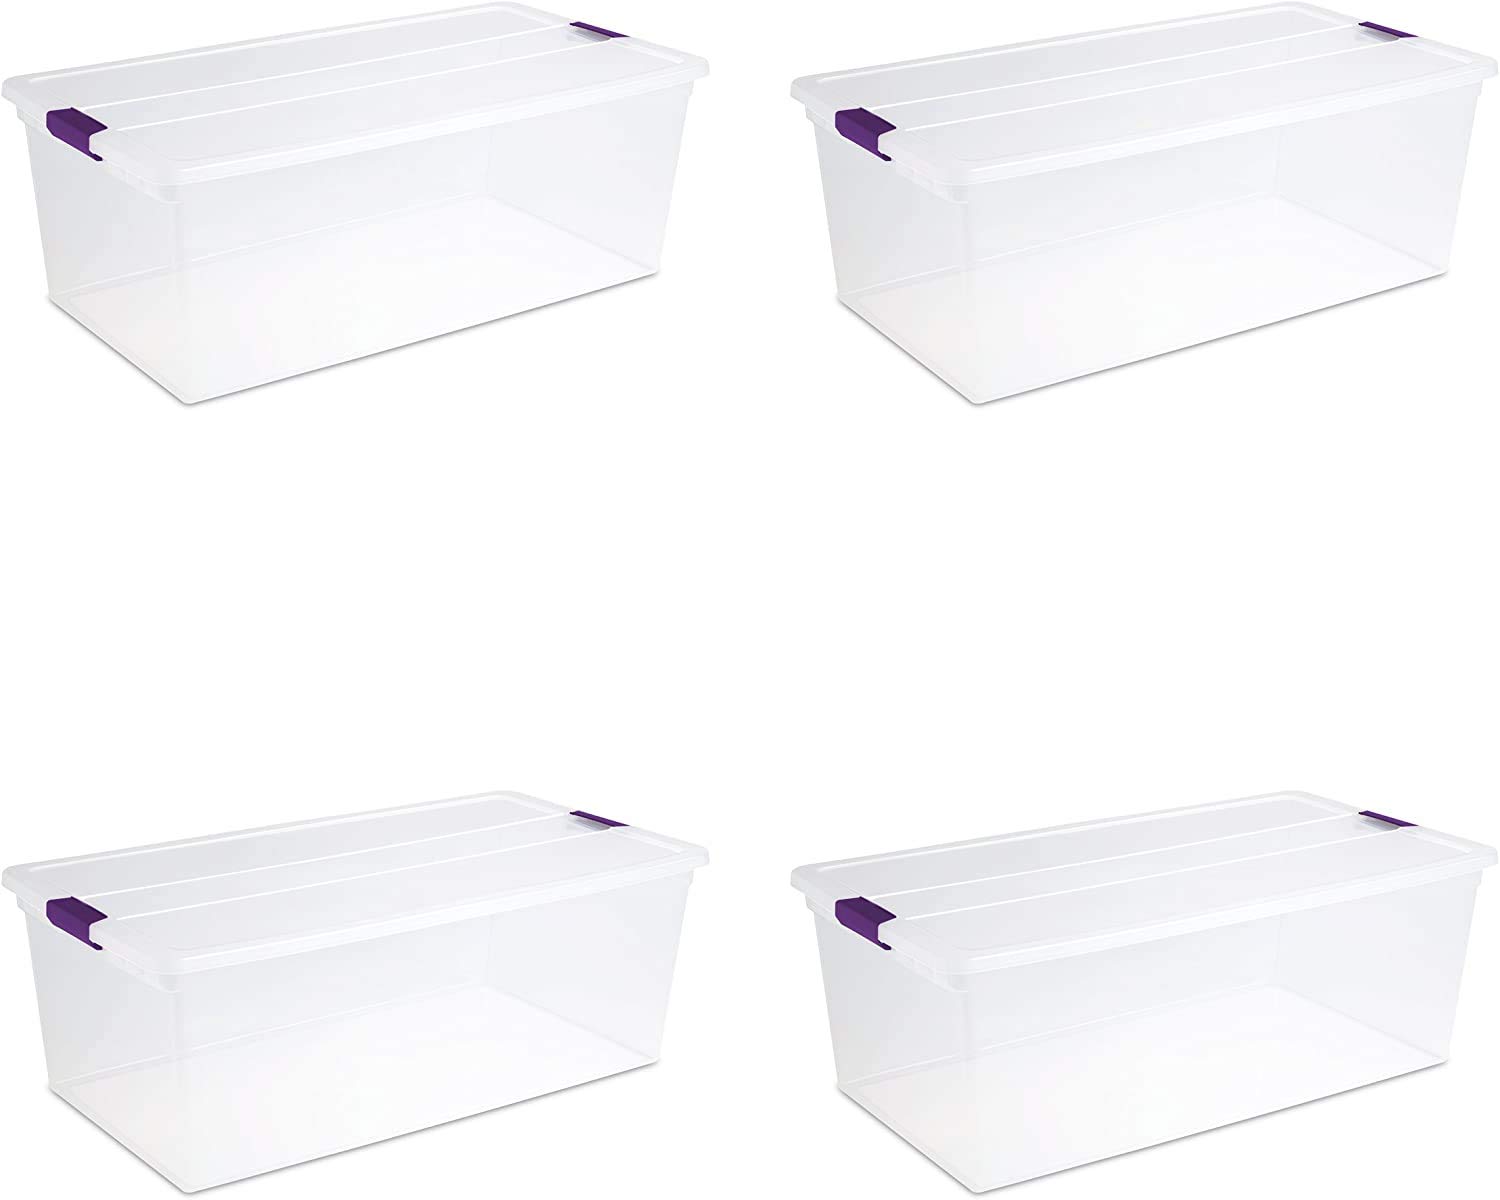 Sterilite 110 Qt ClearView Latch Storage Box, Stackable Bin with Latching Lid, Plastic Container Organize Clothes in Closet, Clear Base, Lid, 1-Pack